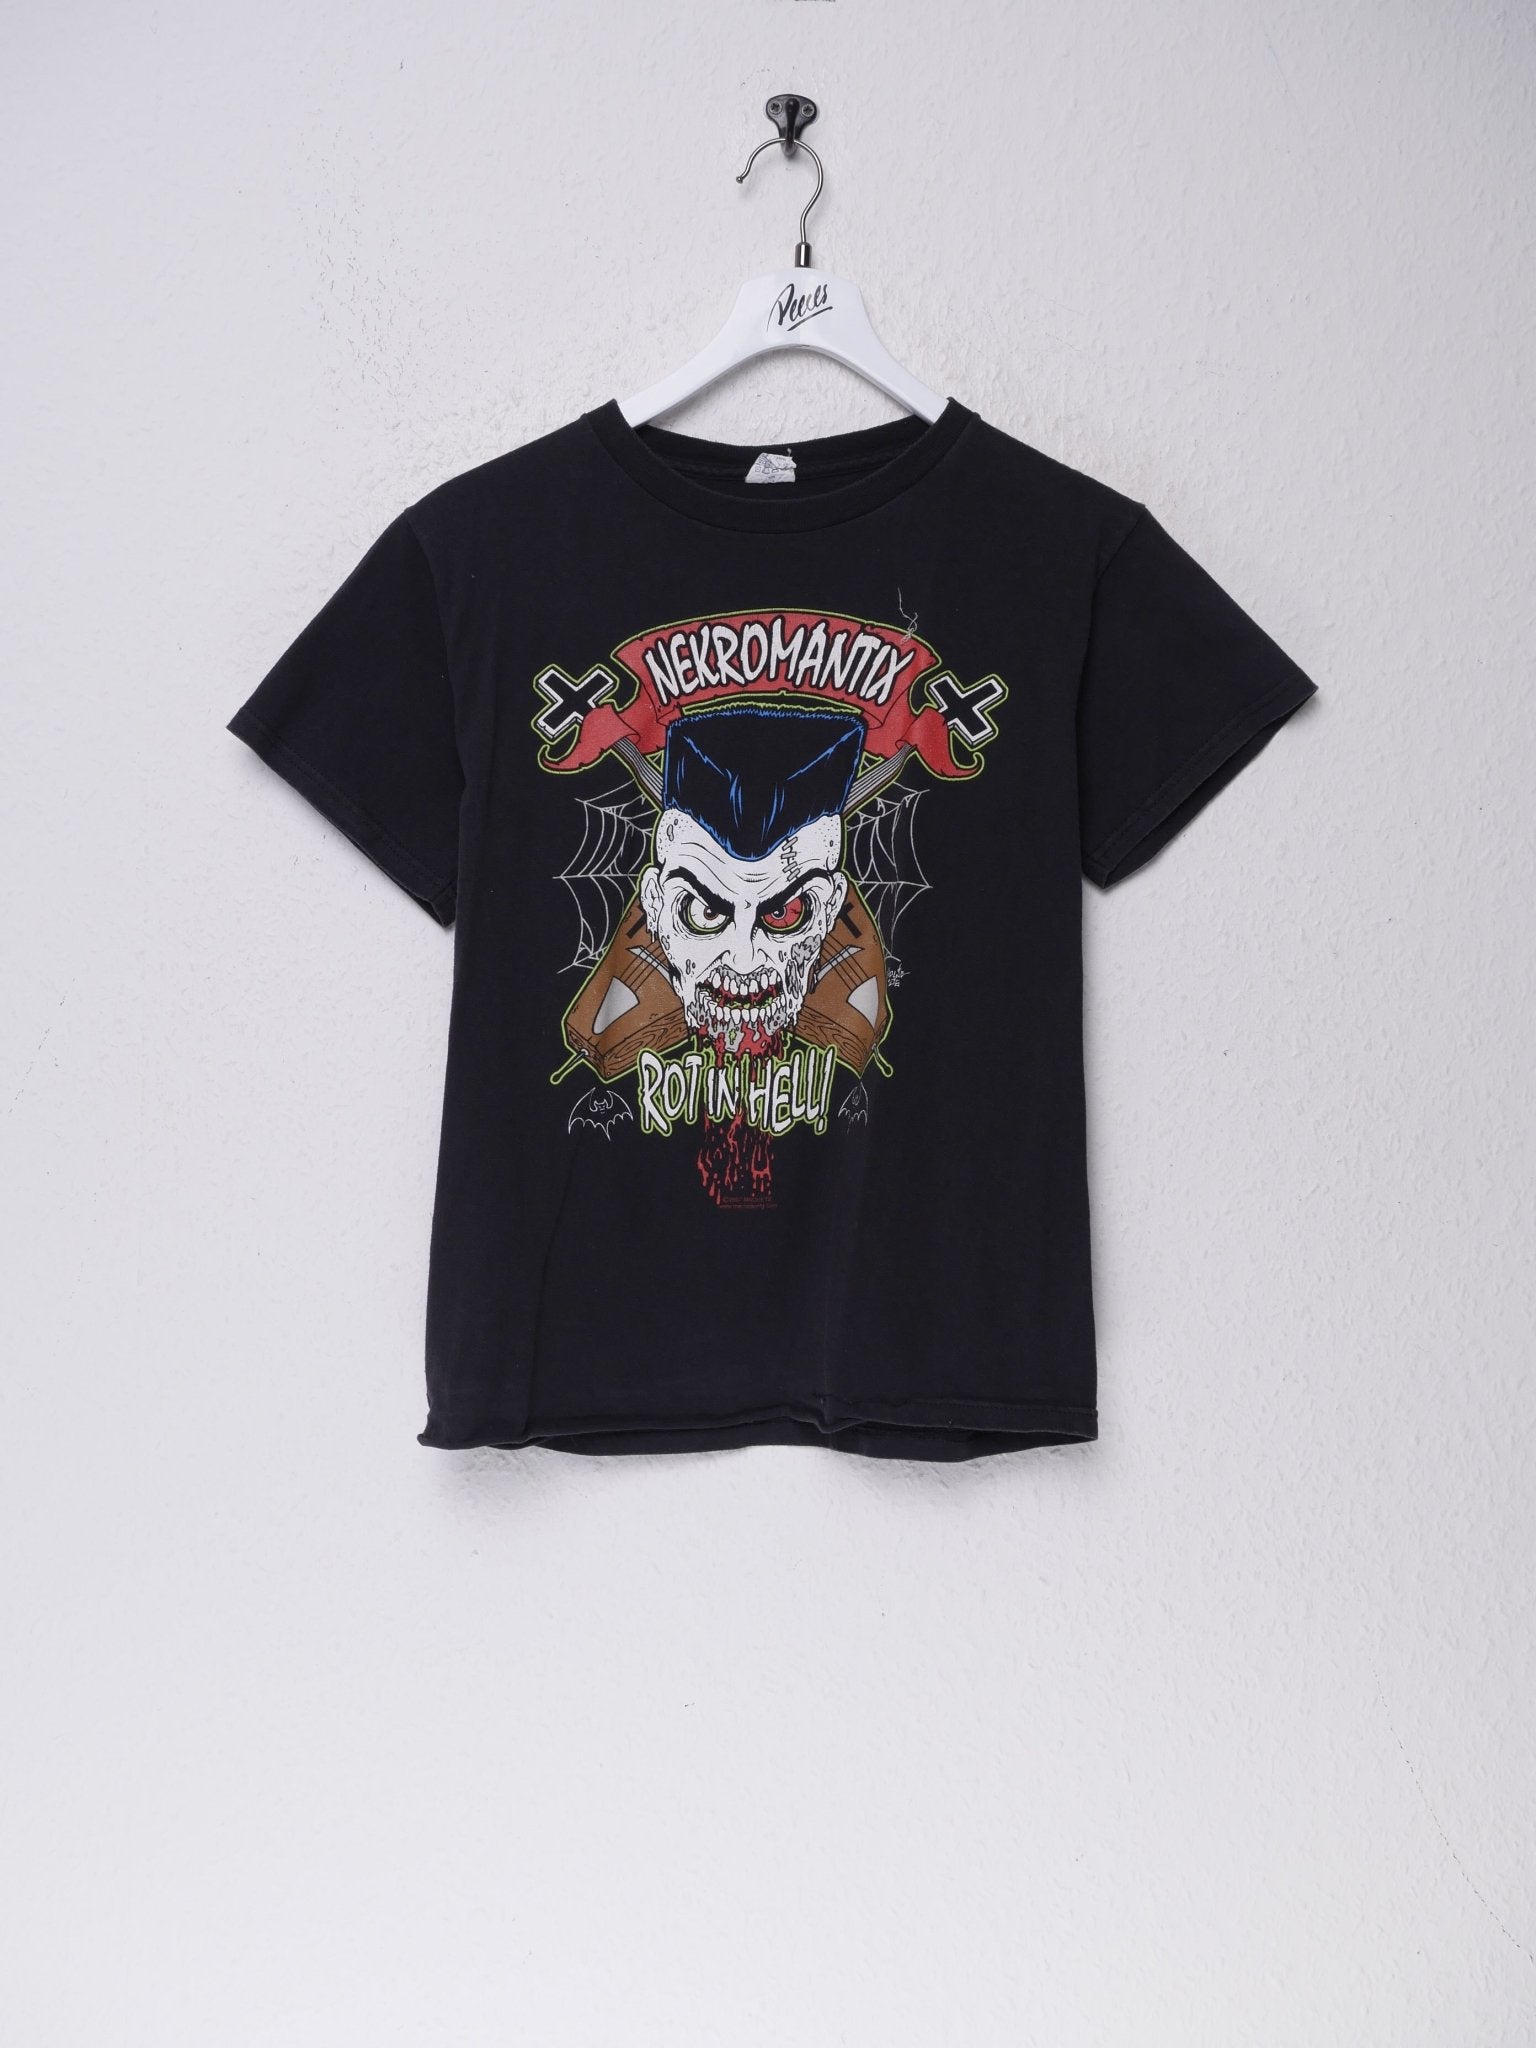 'Necromantix rot in Hell' printed Graphic black Shirt - Peeces